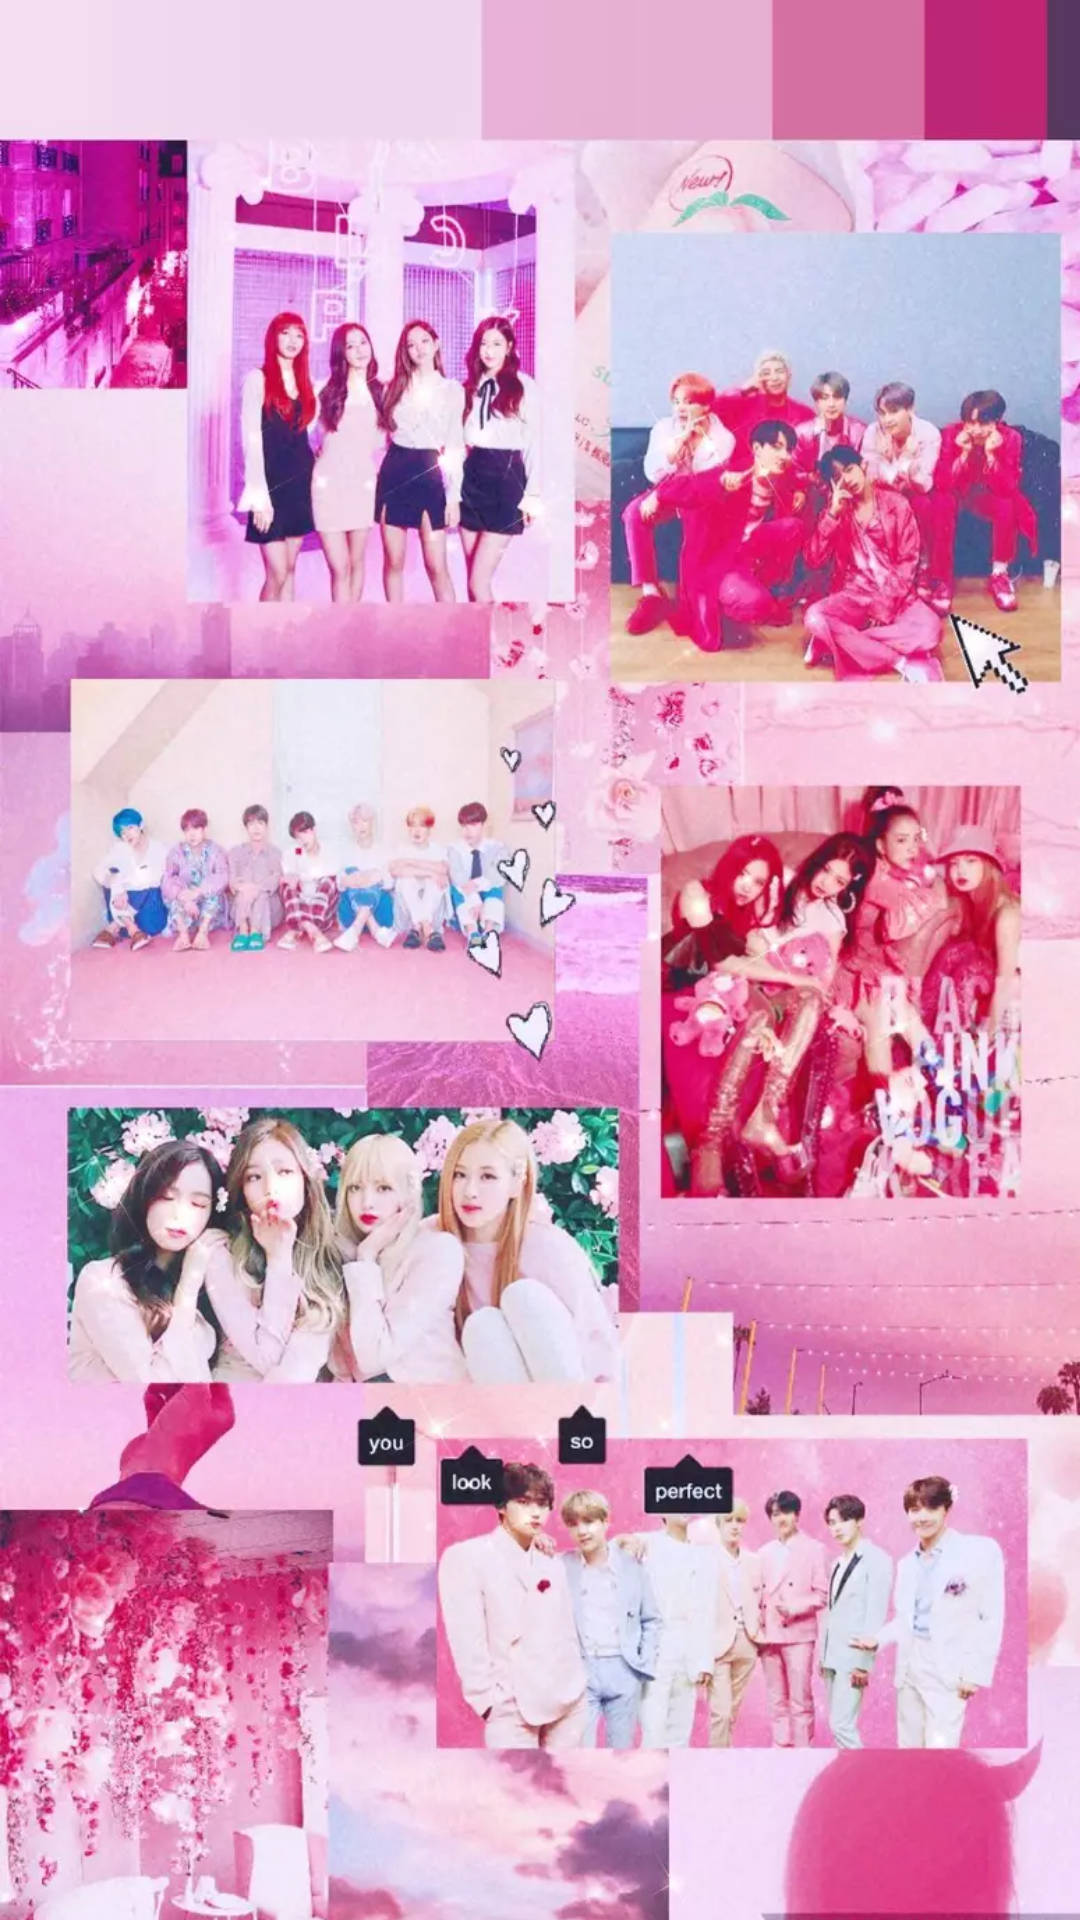 Bts And Blackpink Pink Aesthetic Collage Wallpaper